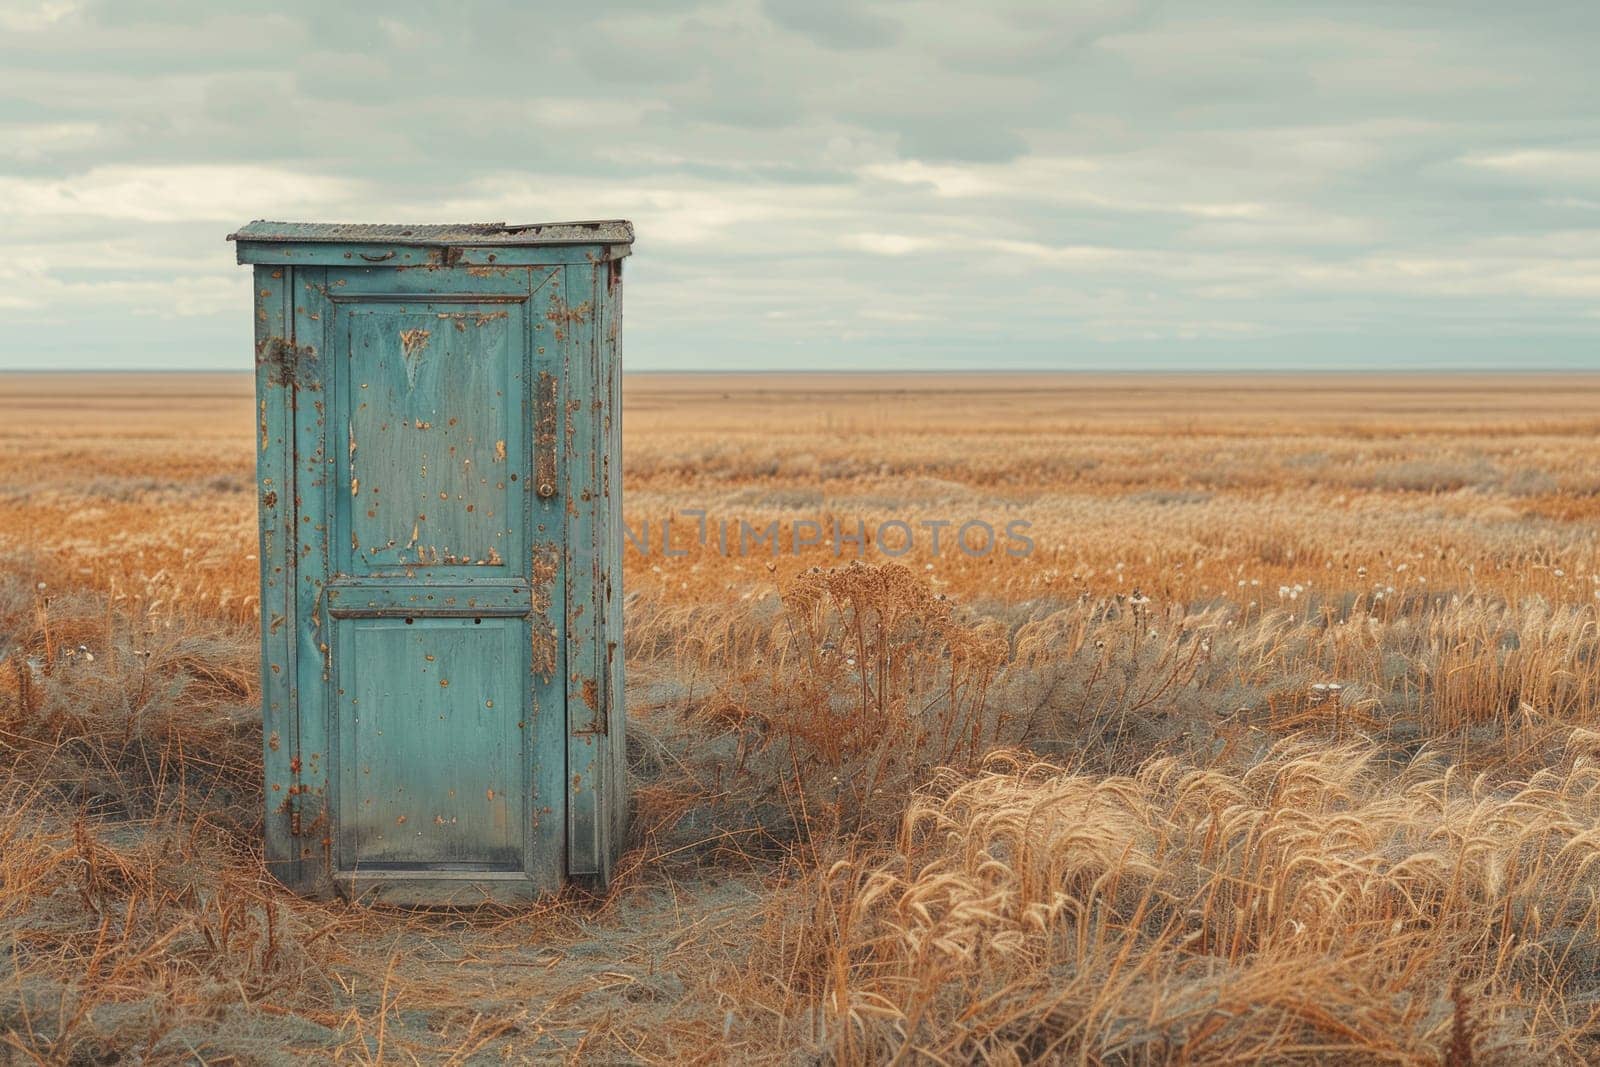 An aged outhouse stands isolated in a vast wheat field, bearing witness to years gone by in rural Russia.